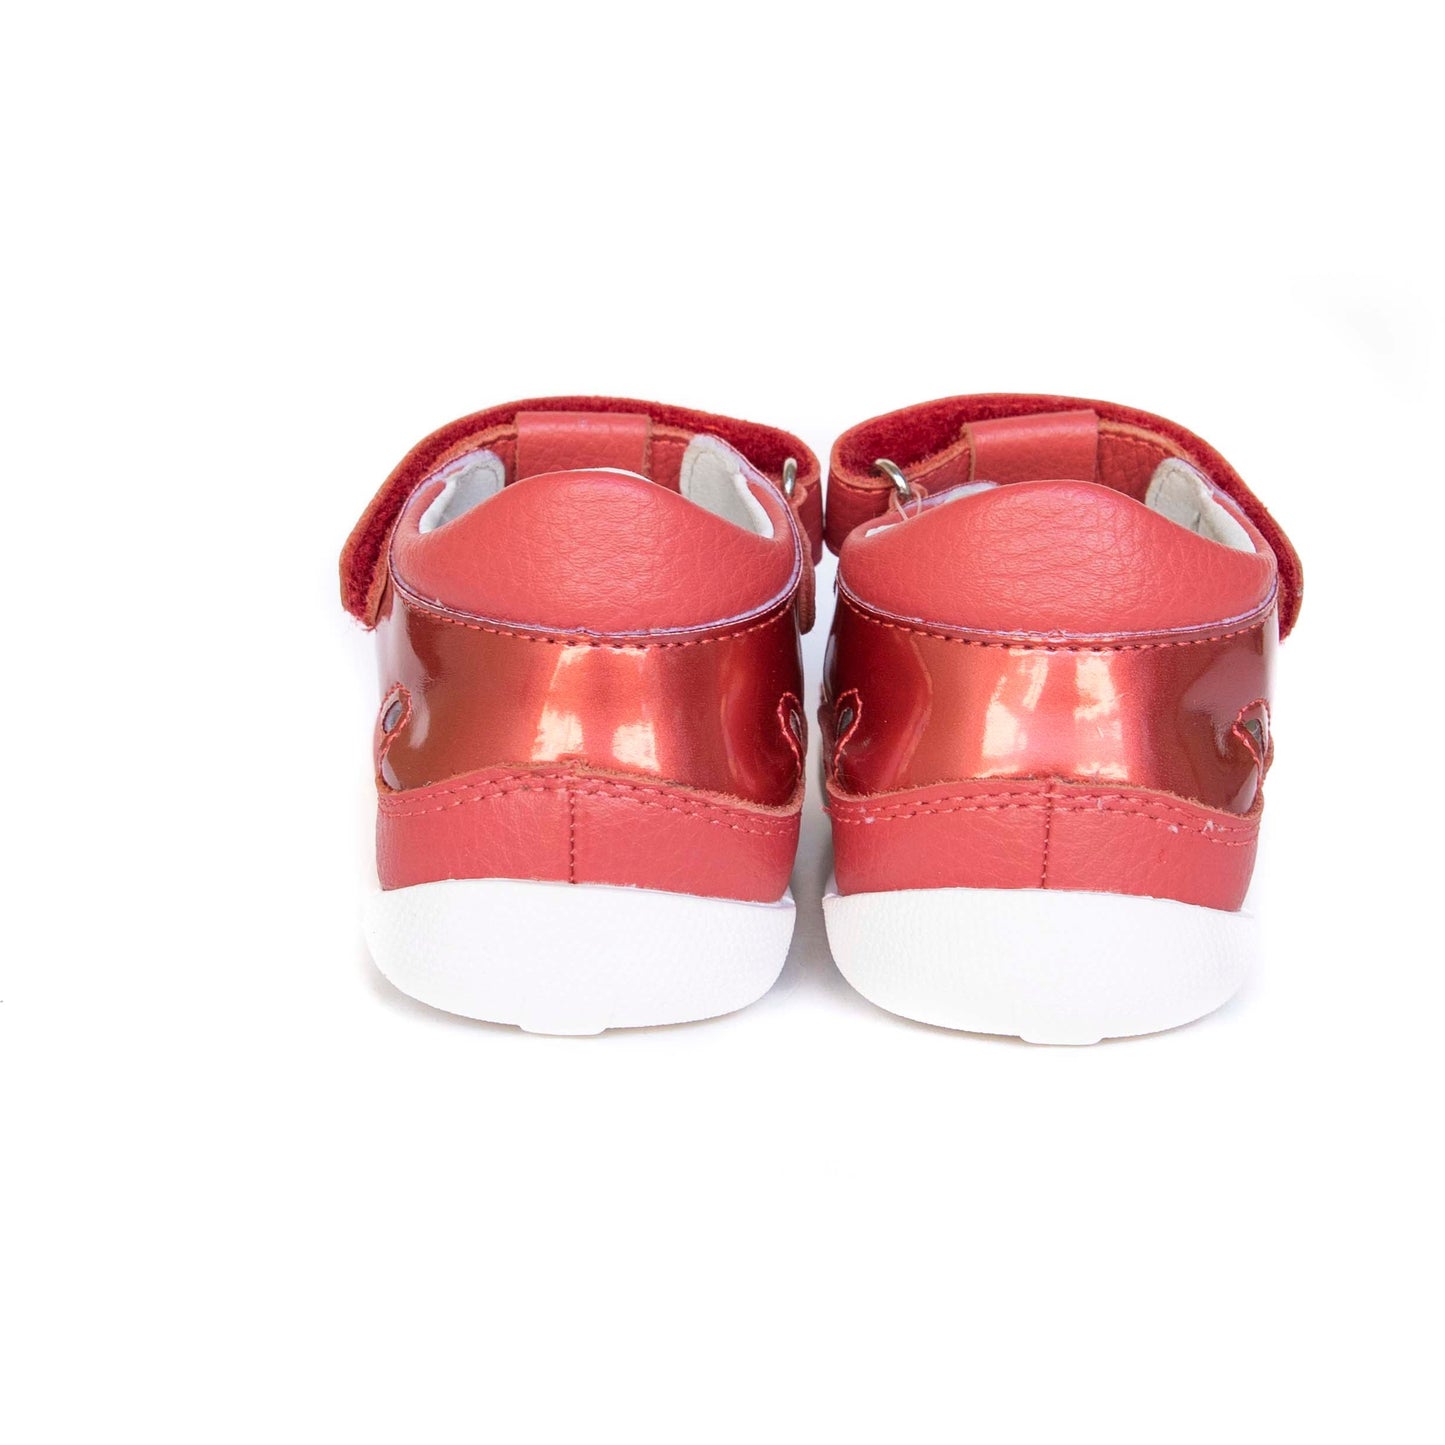 OLIVIA toddler girl arch support shoes - feelgoodshoes.ae